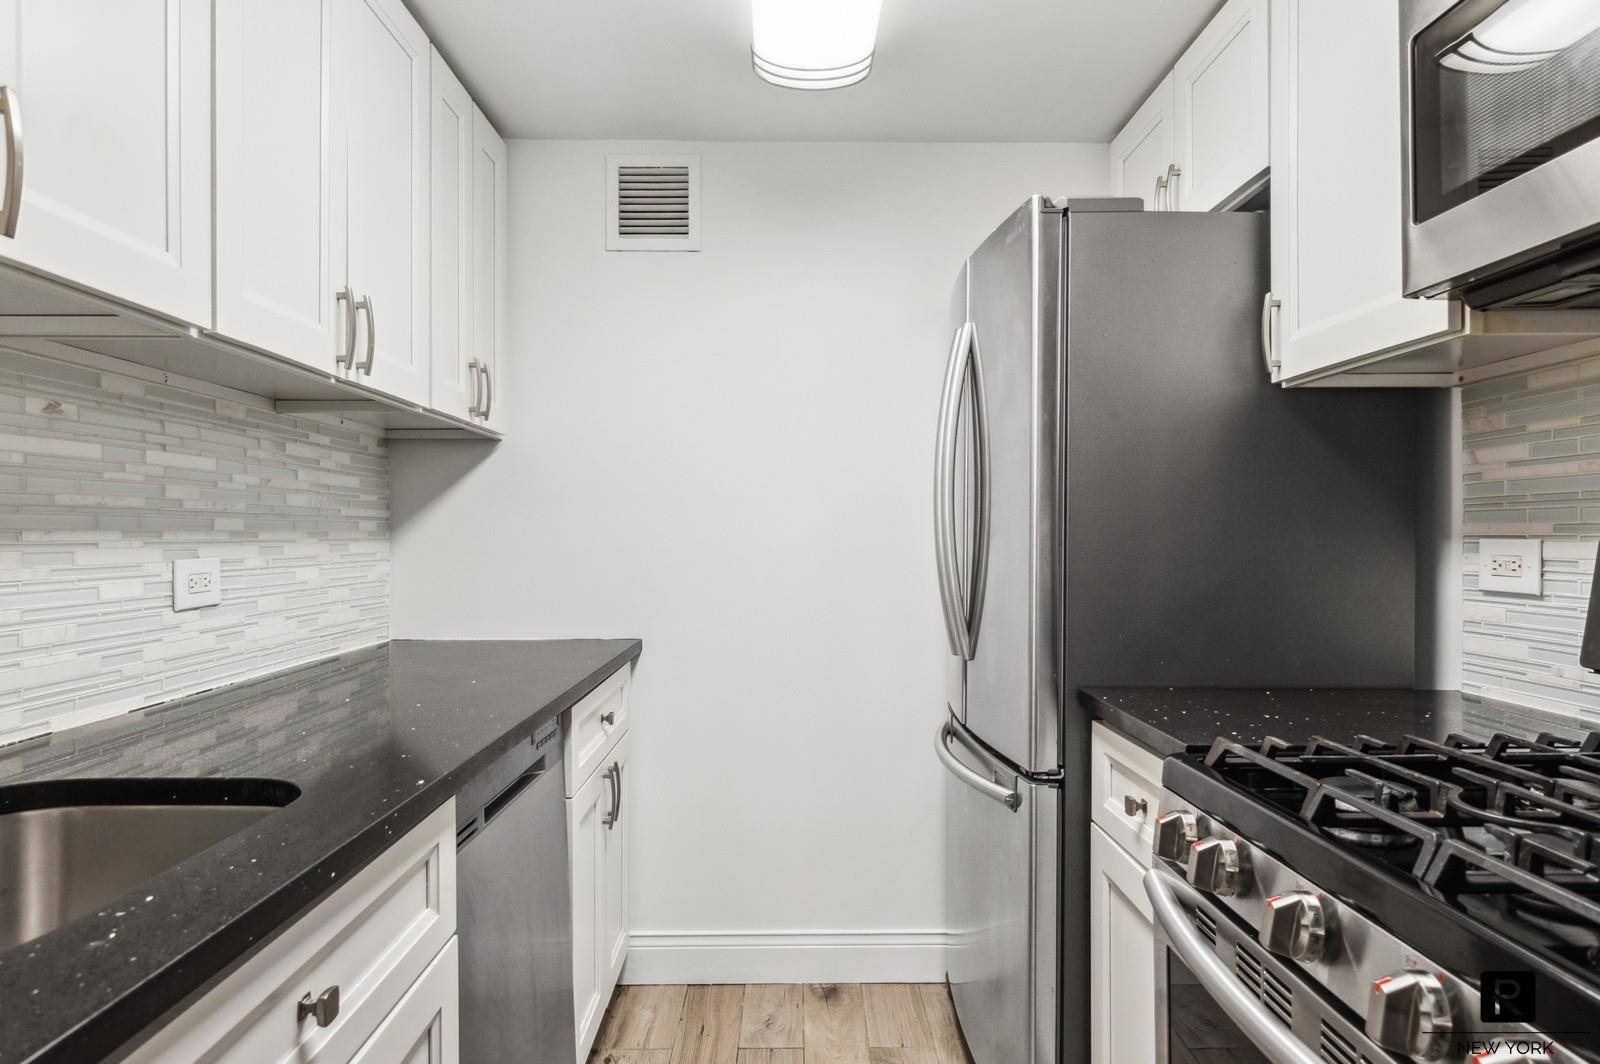 This newly renovated one bedroom Condominium unit is one of the best values in Battery Park City and an ideal starter home, pied a terre, or investment property.